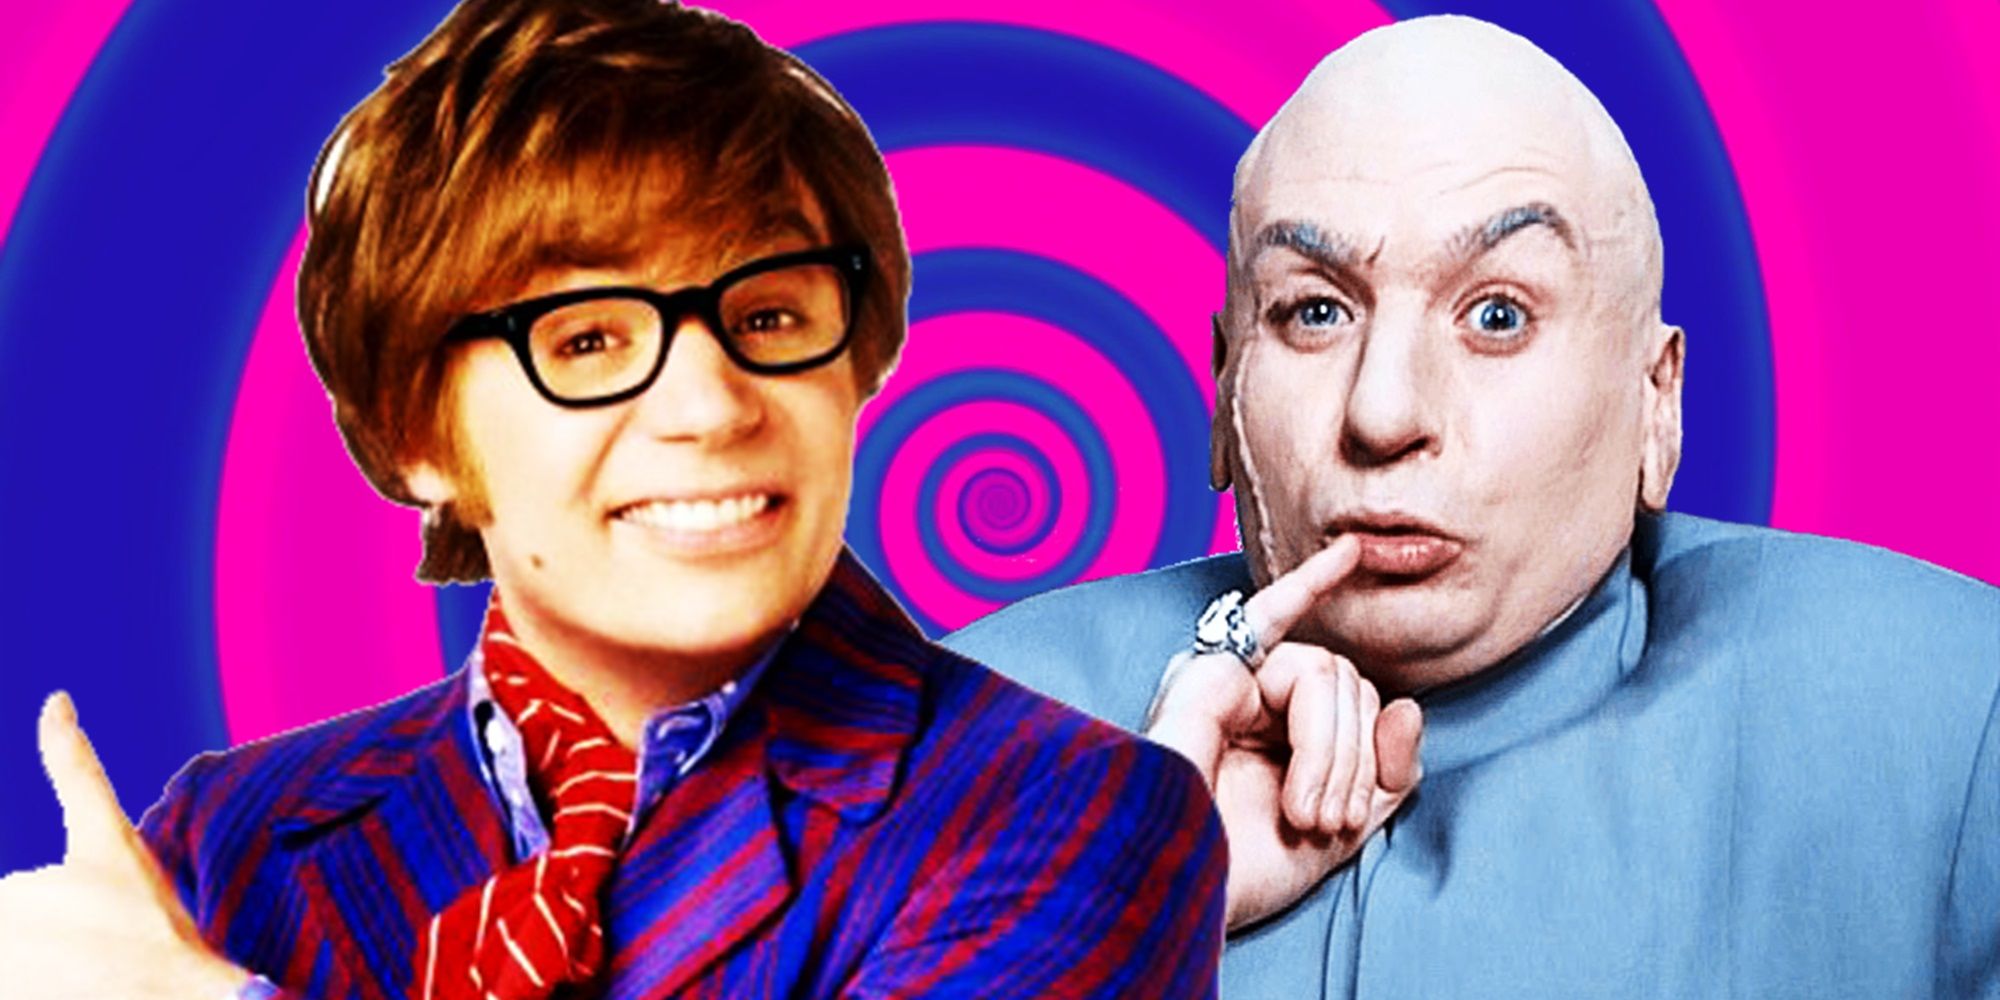 https://static1.srcdn.com/wordpress/wp-content/uploads/2023/11/collage-of-austin-powers-and-dr-evil-against-a-psychedelic-backdrop.jpg